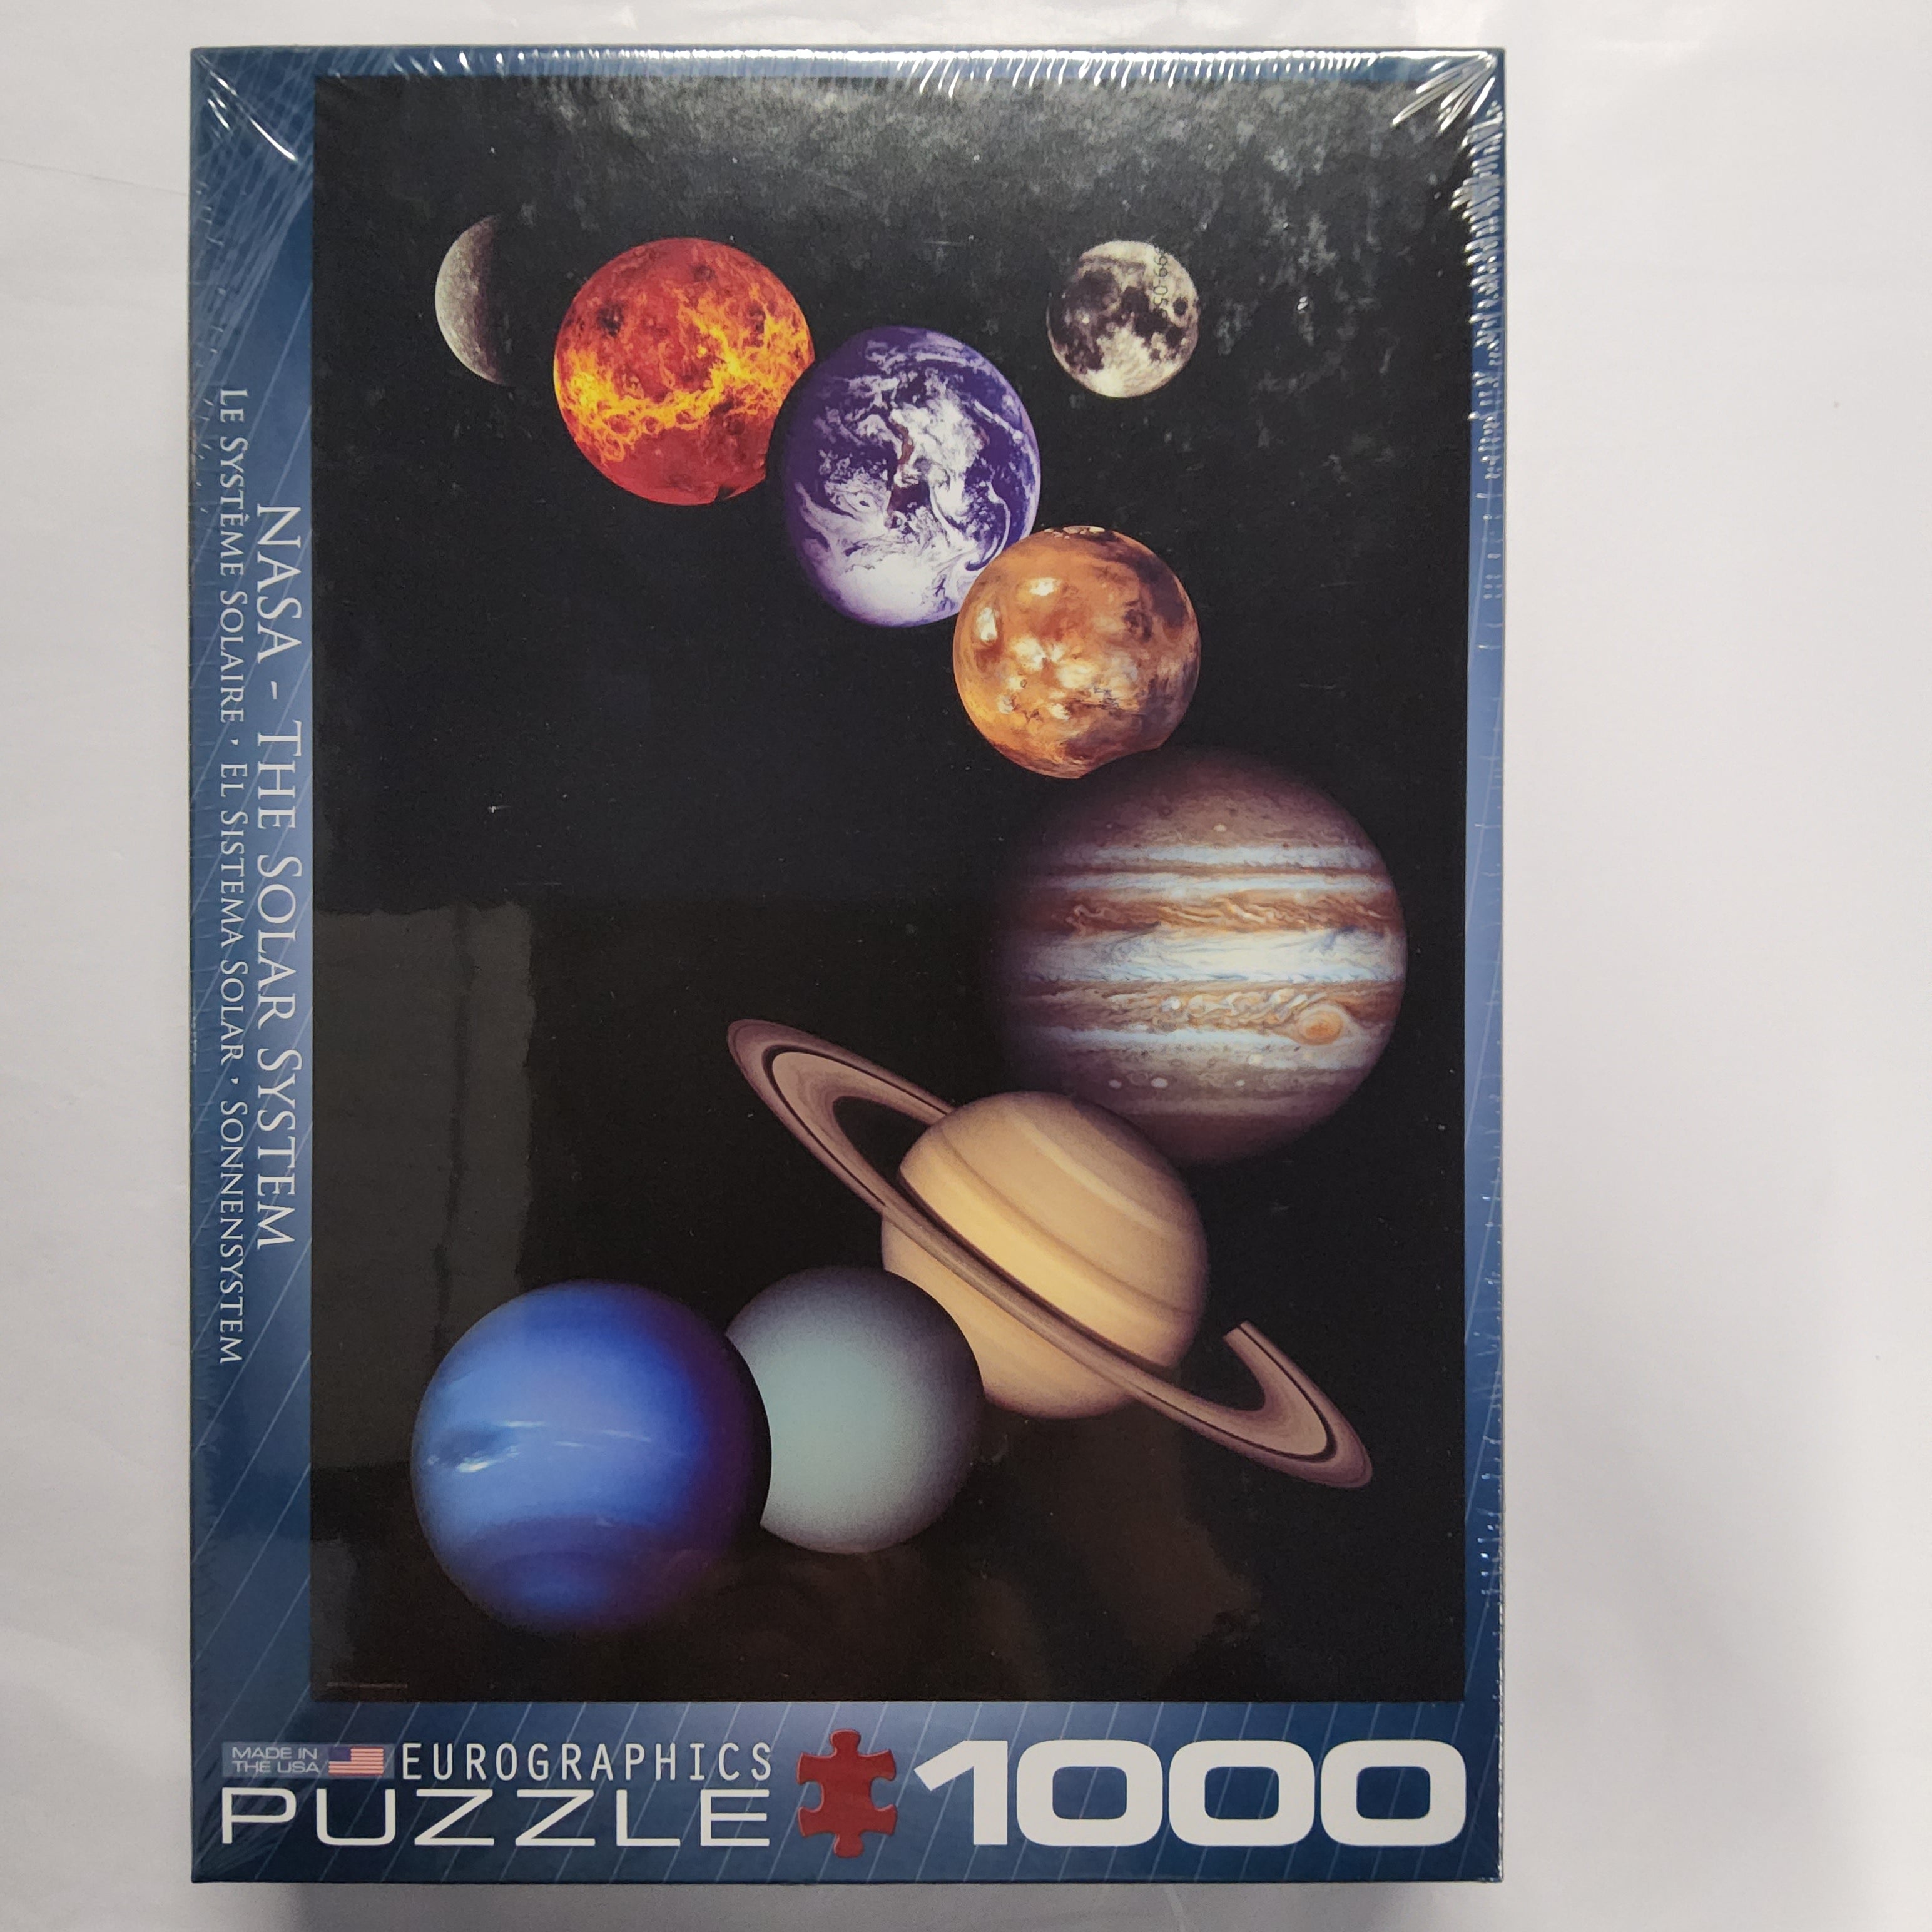 Eurographics Puzzle - NASA - The Solar System - 1000 pieces - 6000-0100